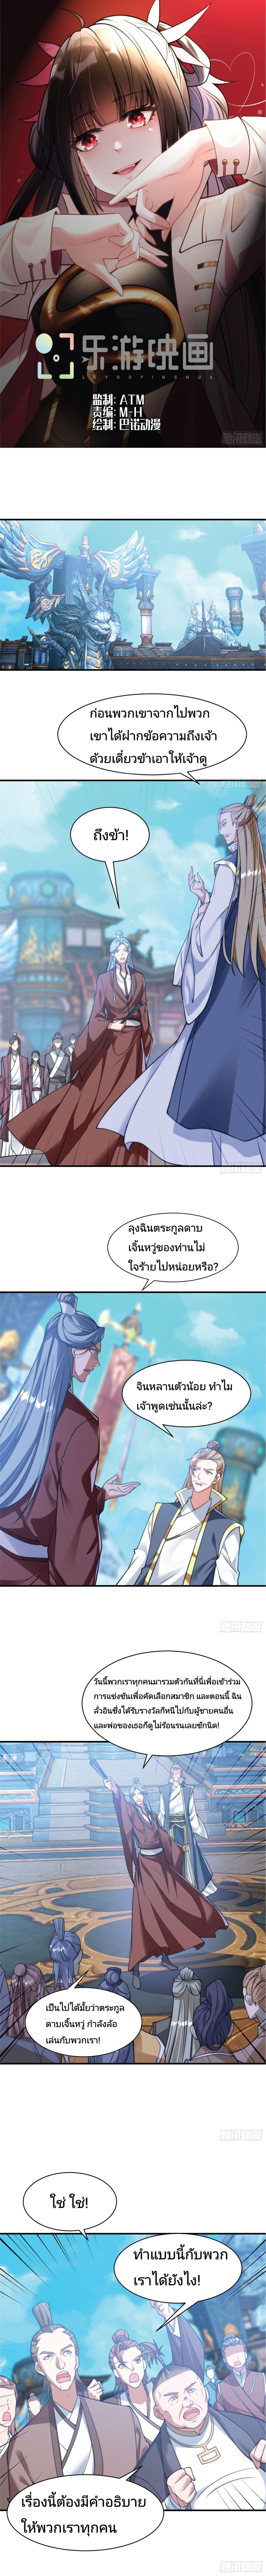 The Strongest Brother 8 แปลไทย